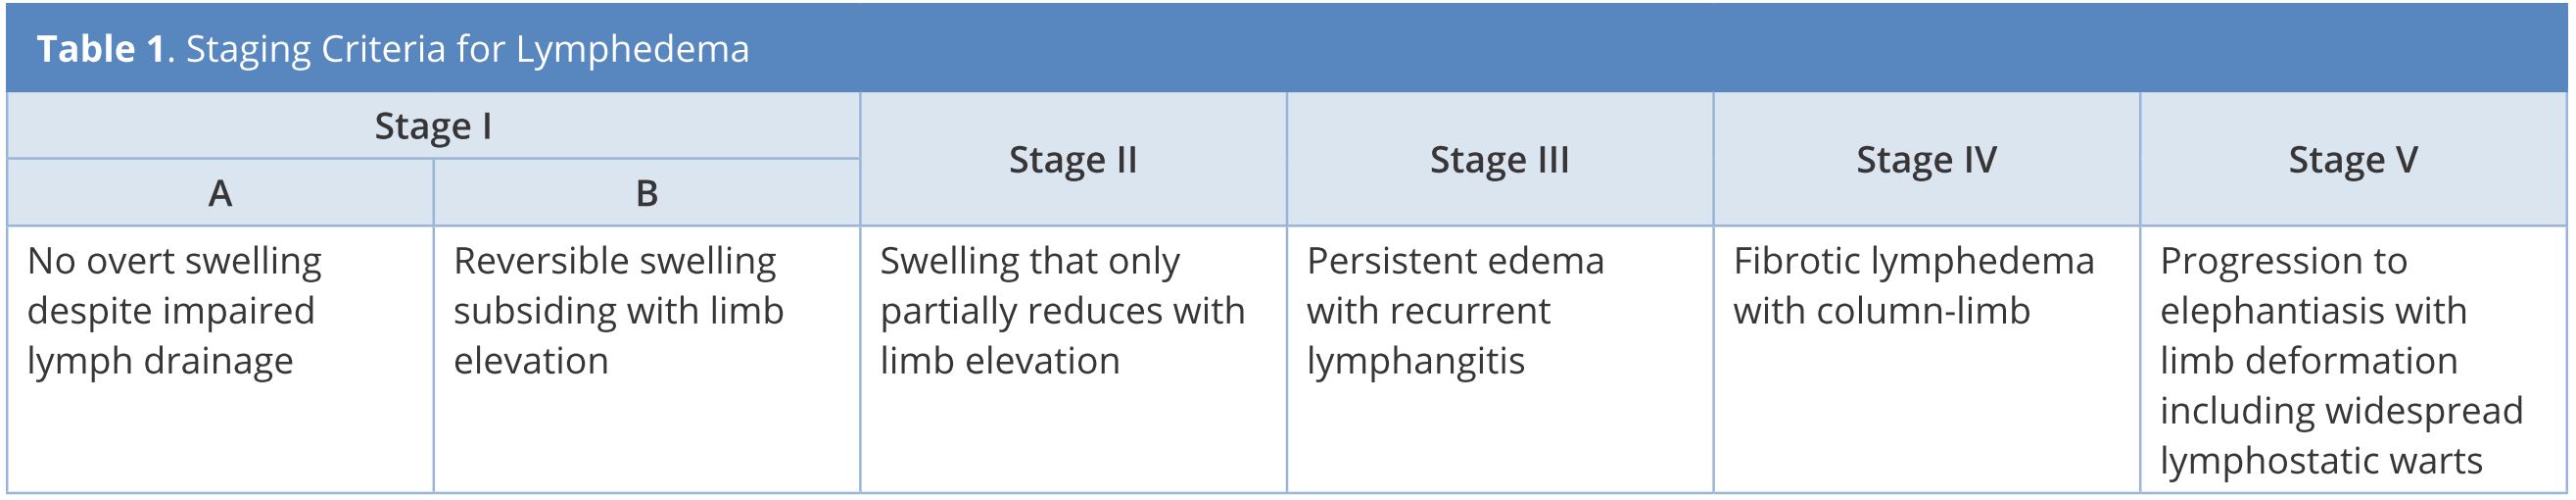 Table 1.JPGStaging criteria for lymphedema is adapted from Campisi, et al.